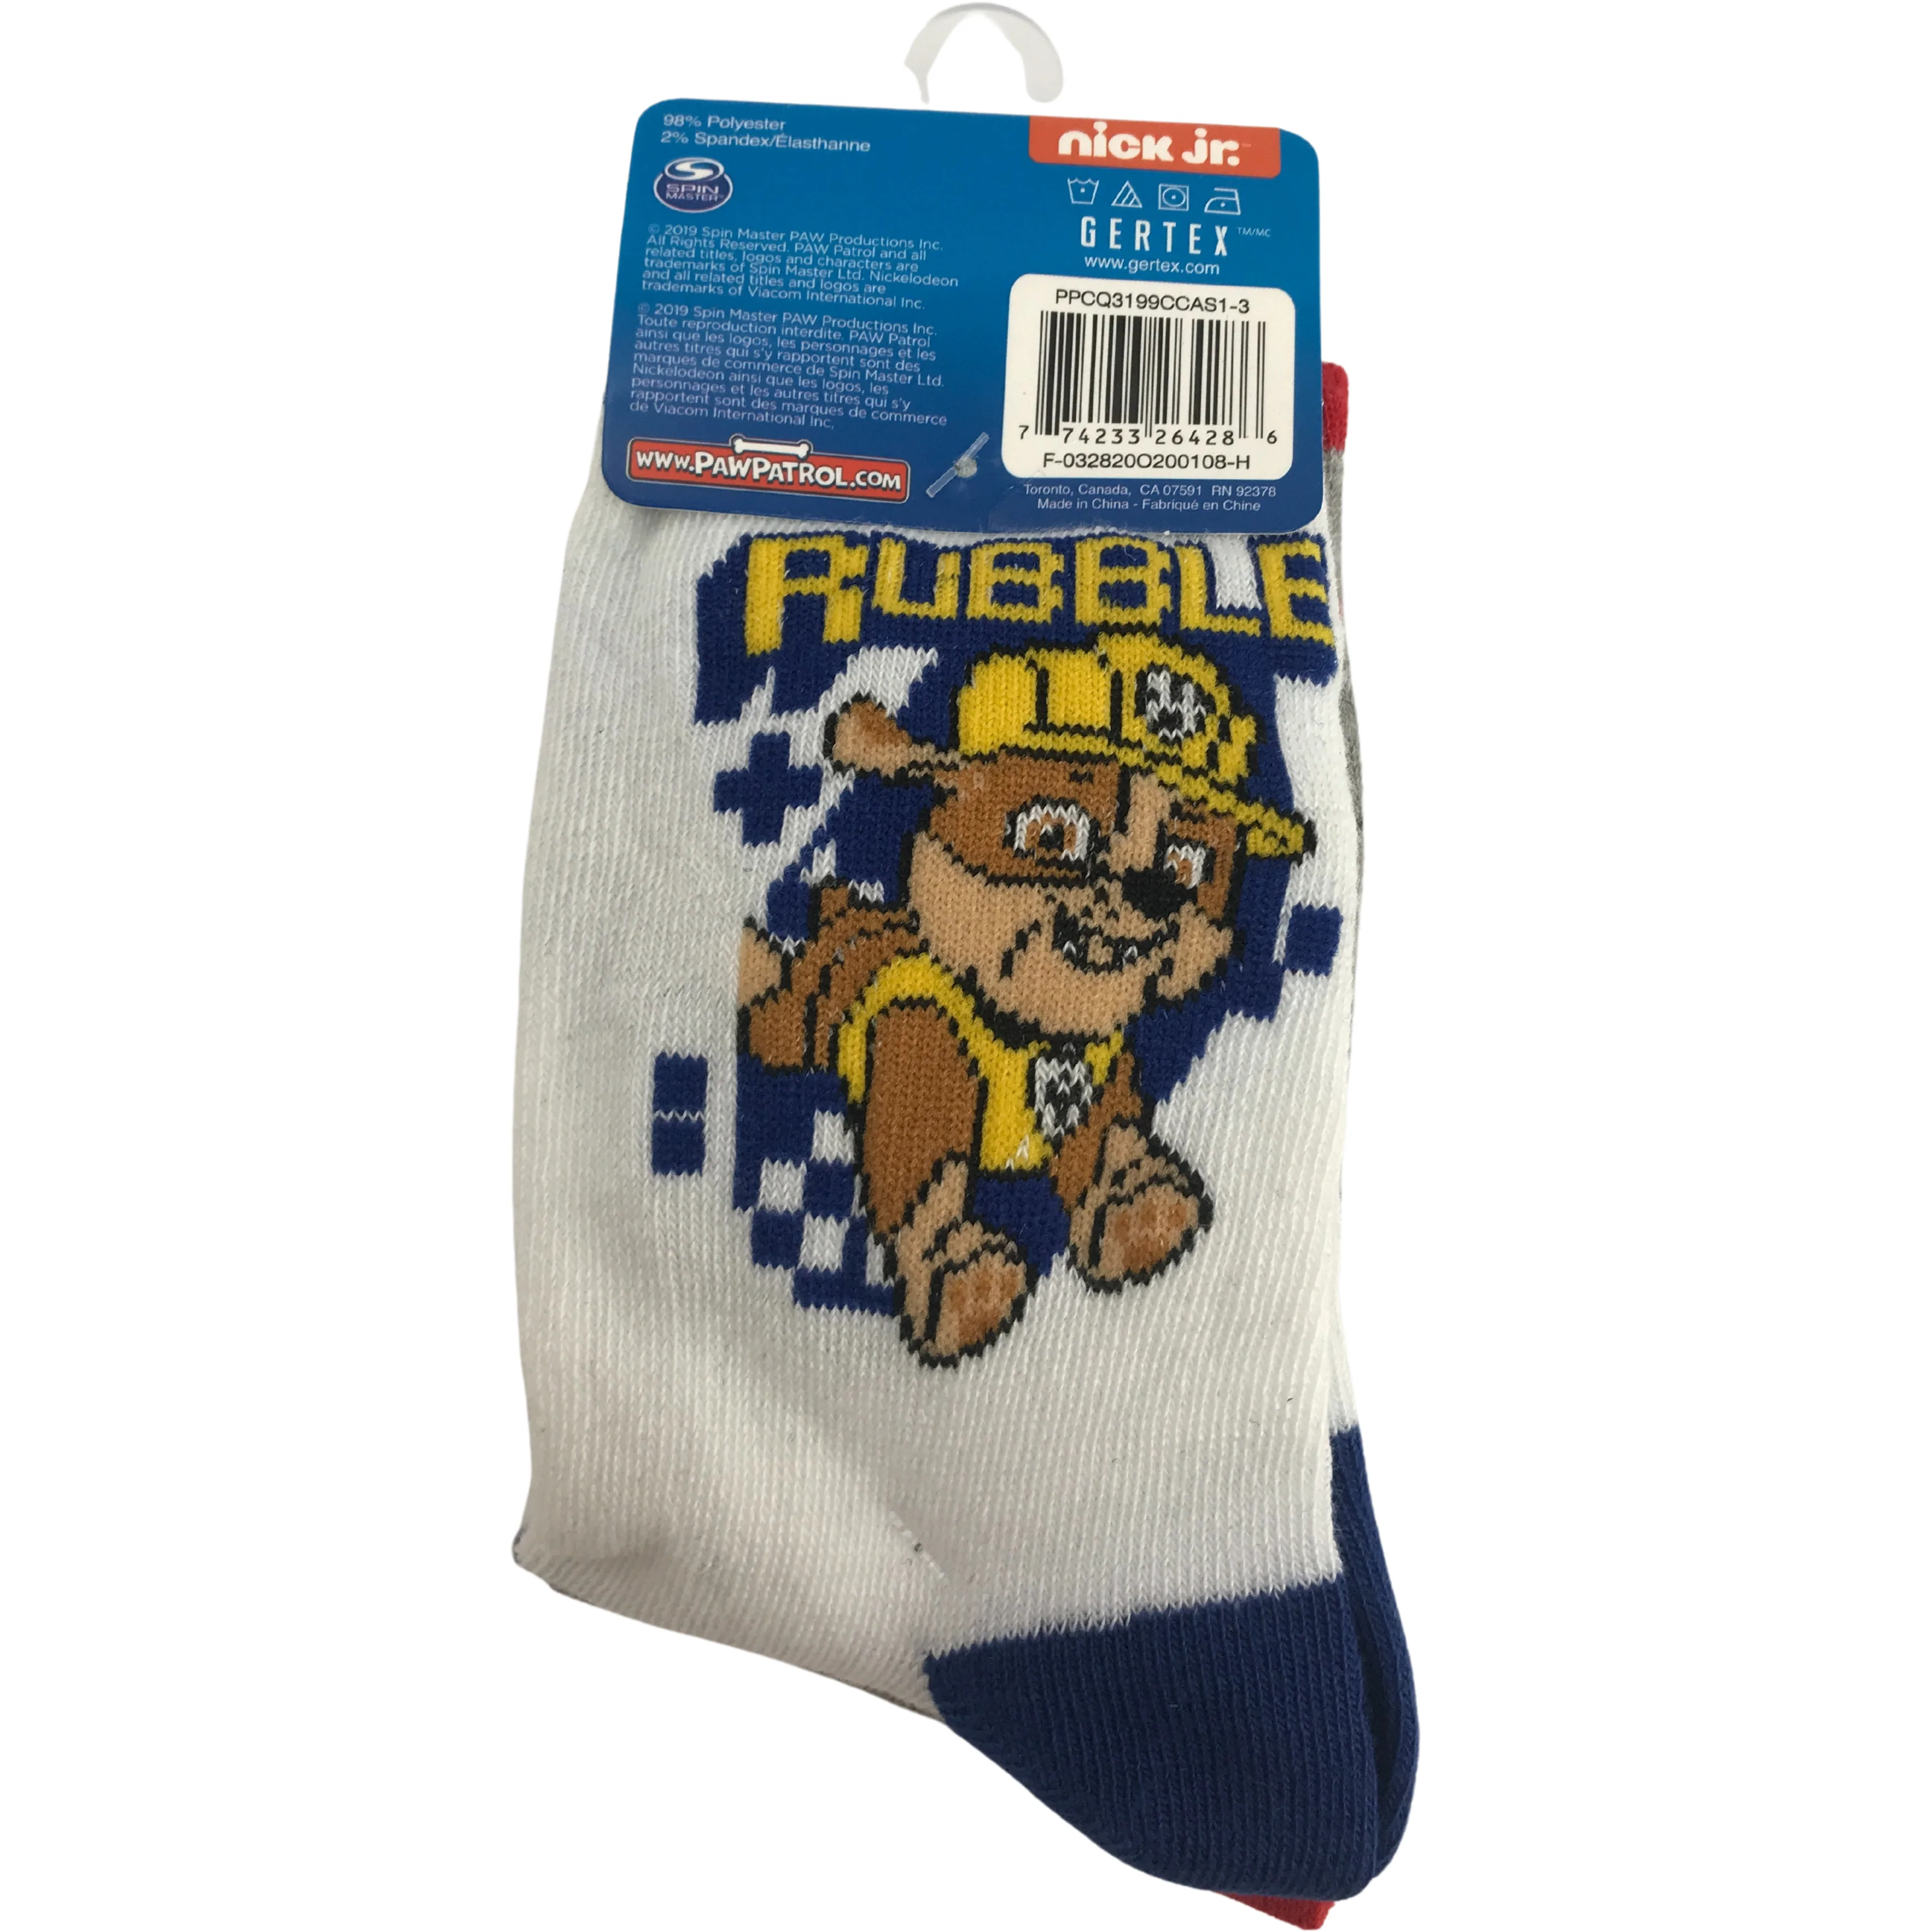 Paw Patrol Children's Socks: 3 pack / Rubble, Chase & Marshall / Size 3-6